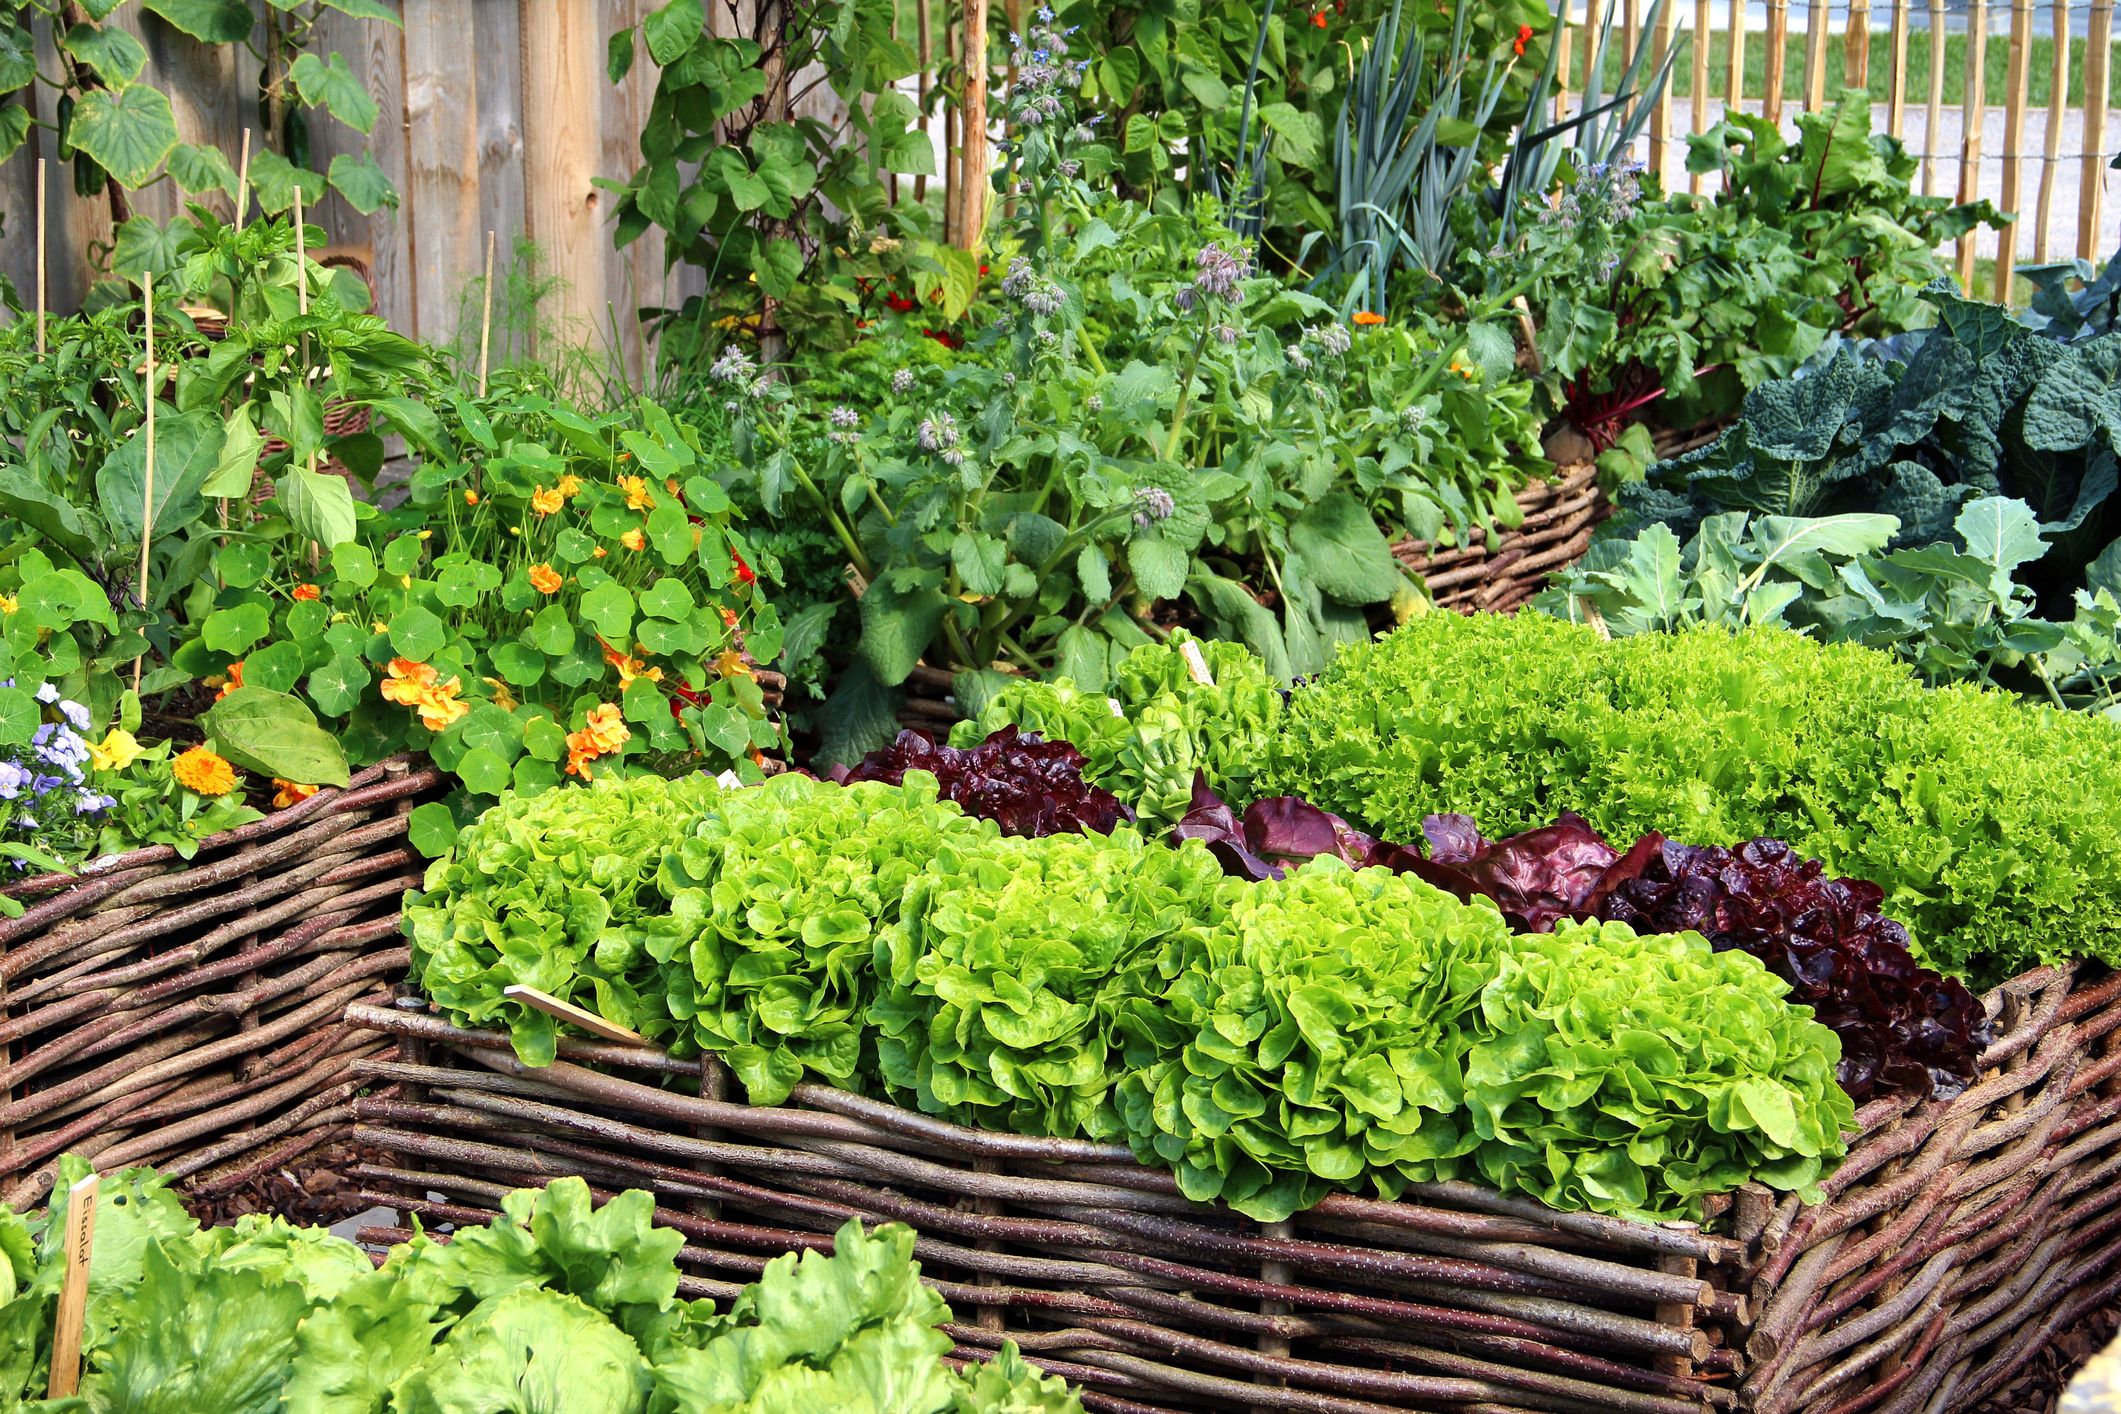 15 Best Vegetables to Grow - Easy Vegetables to Plant